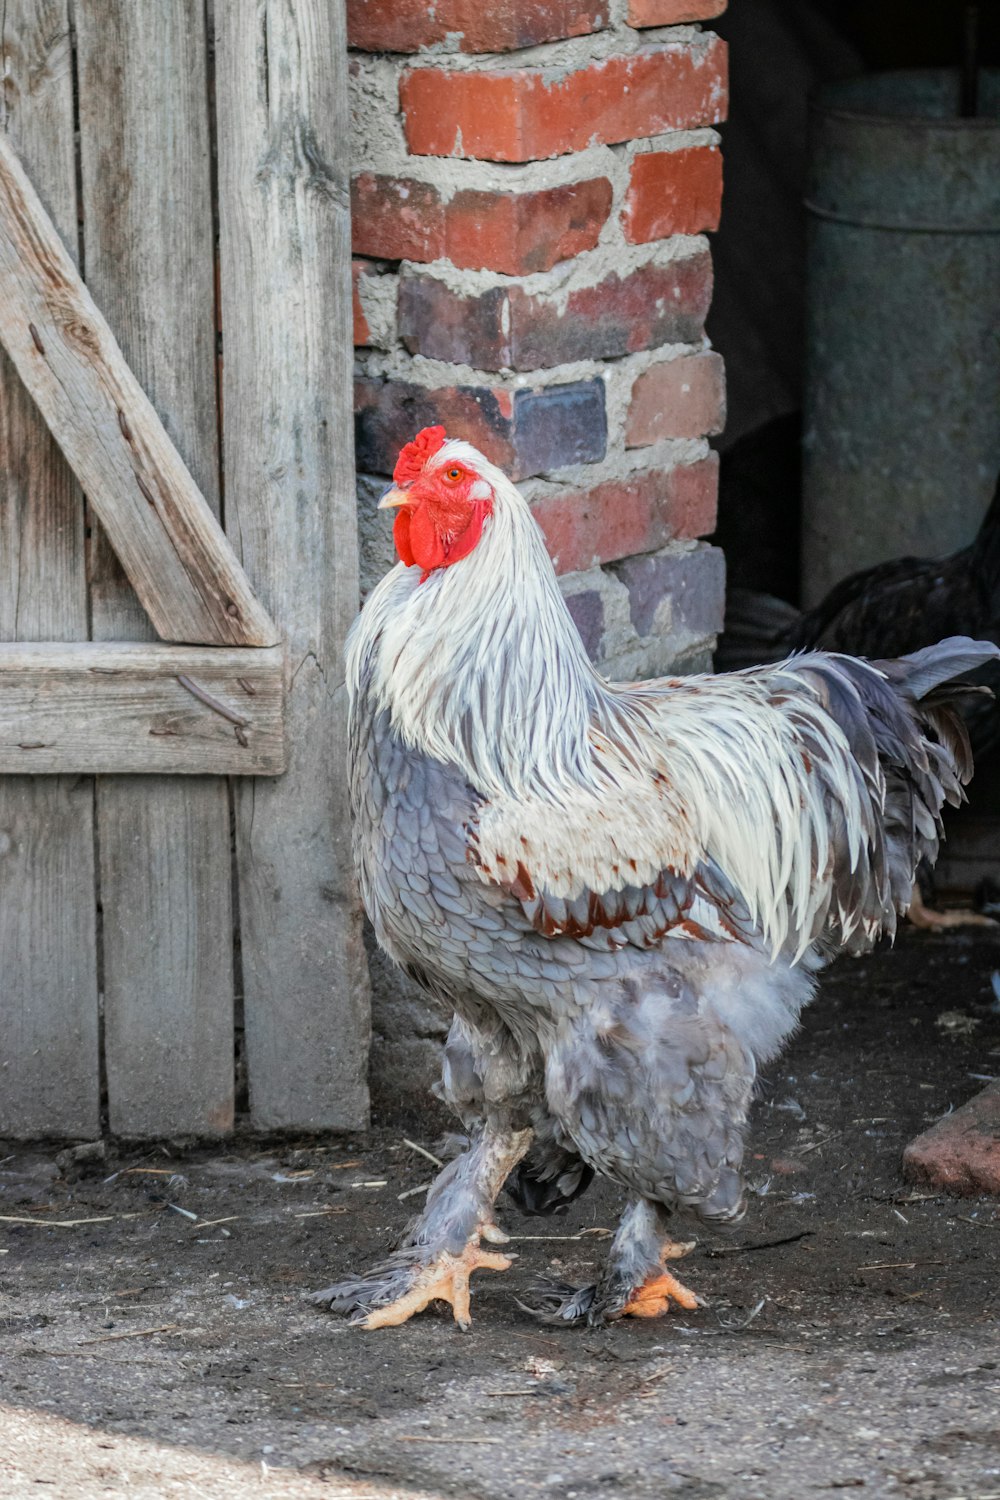 a rooster standing in front of a brick building